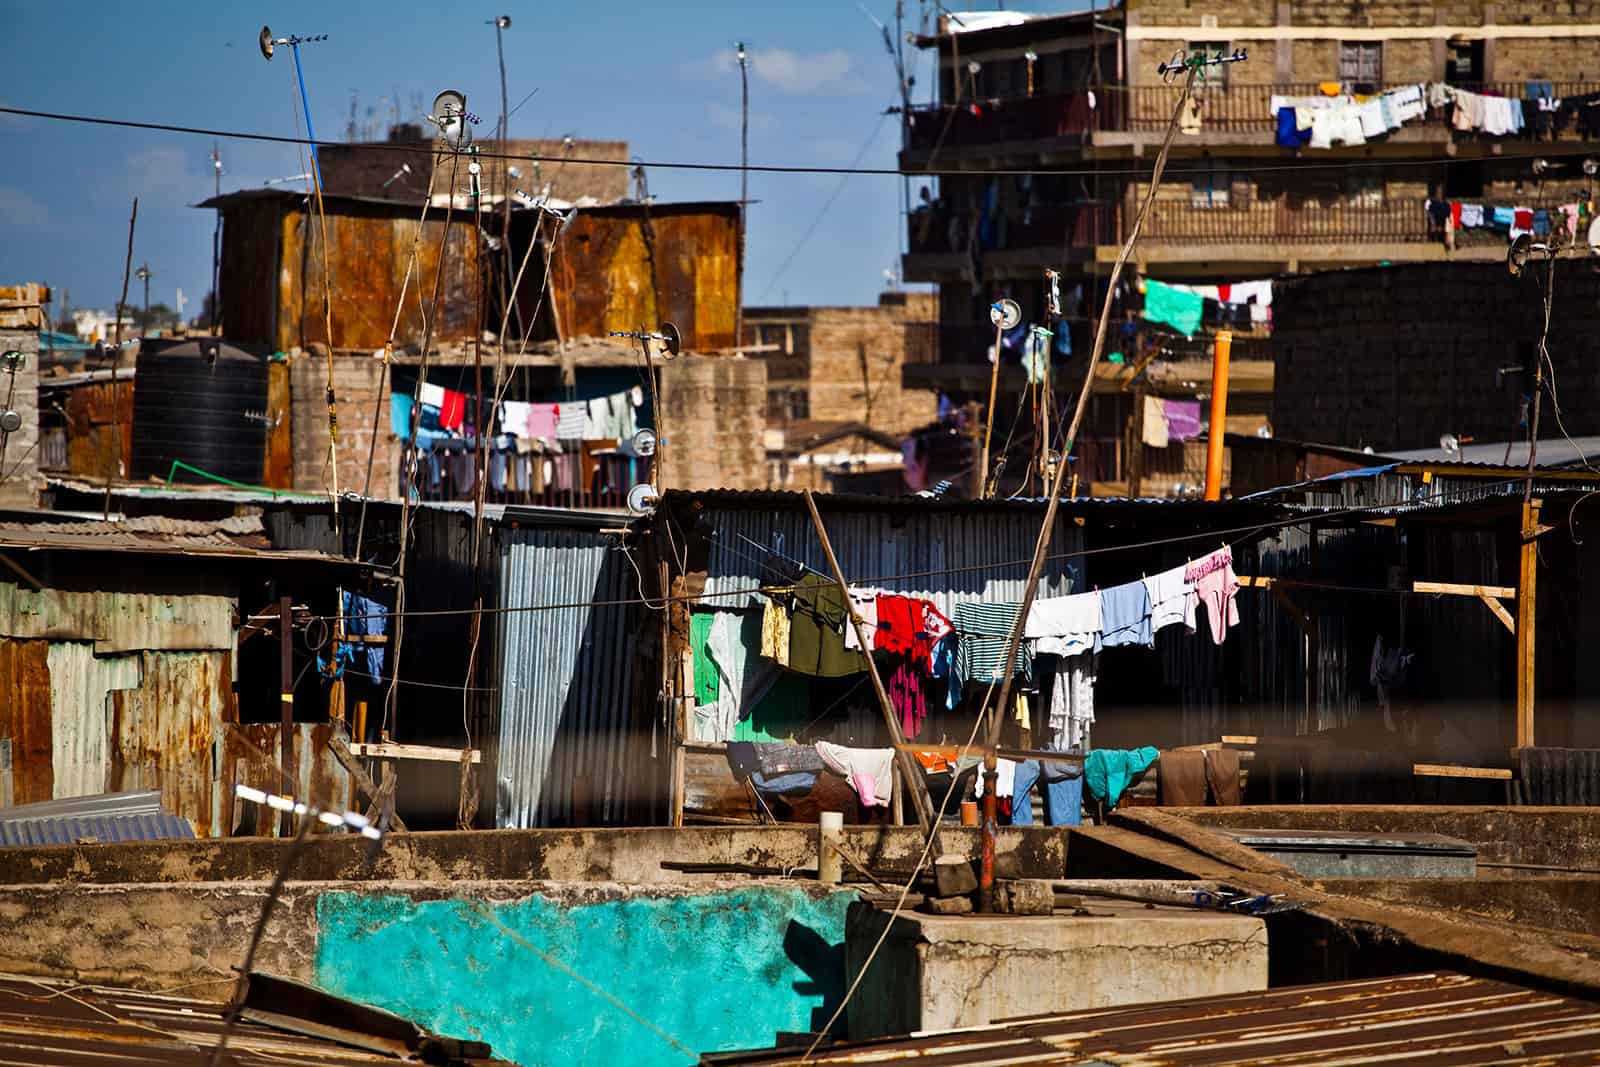 A slum in Kenya like the one sometimes visited in poverty tourism